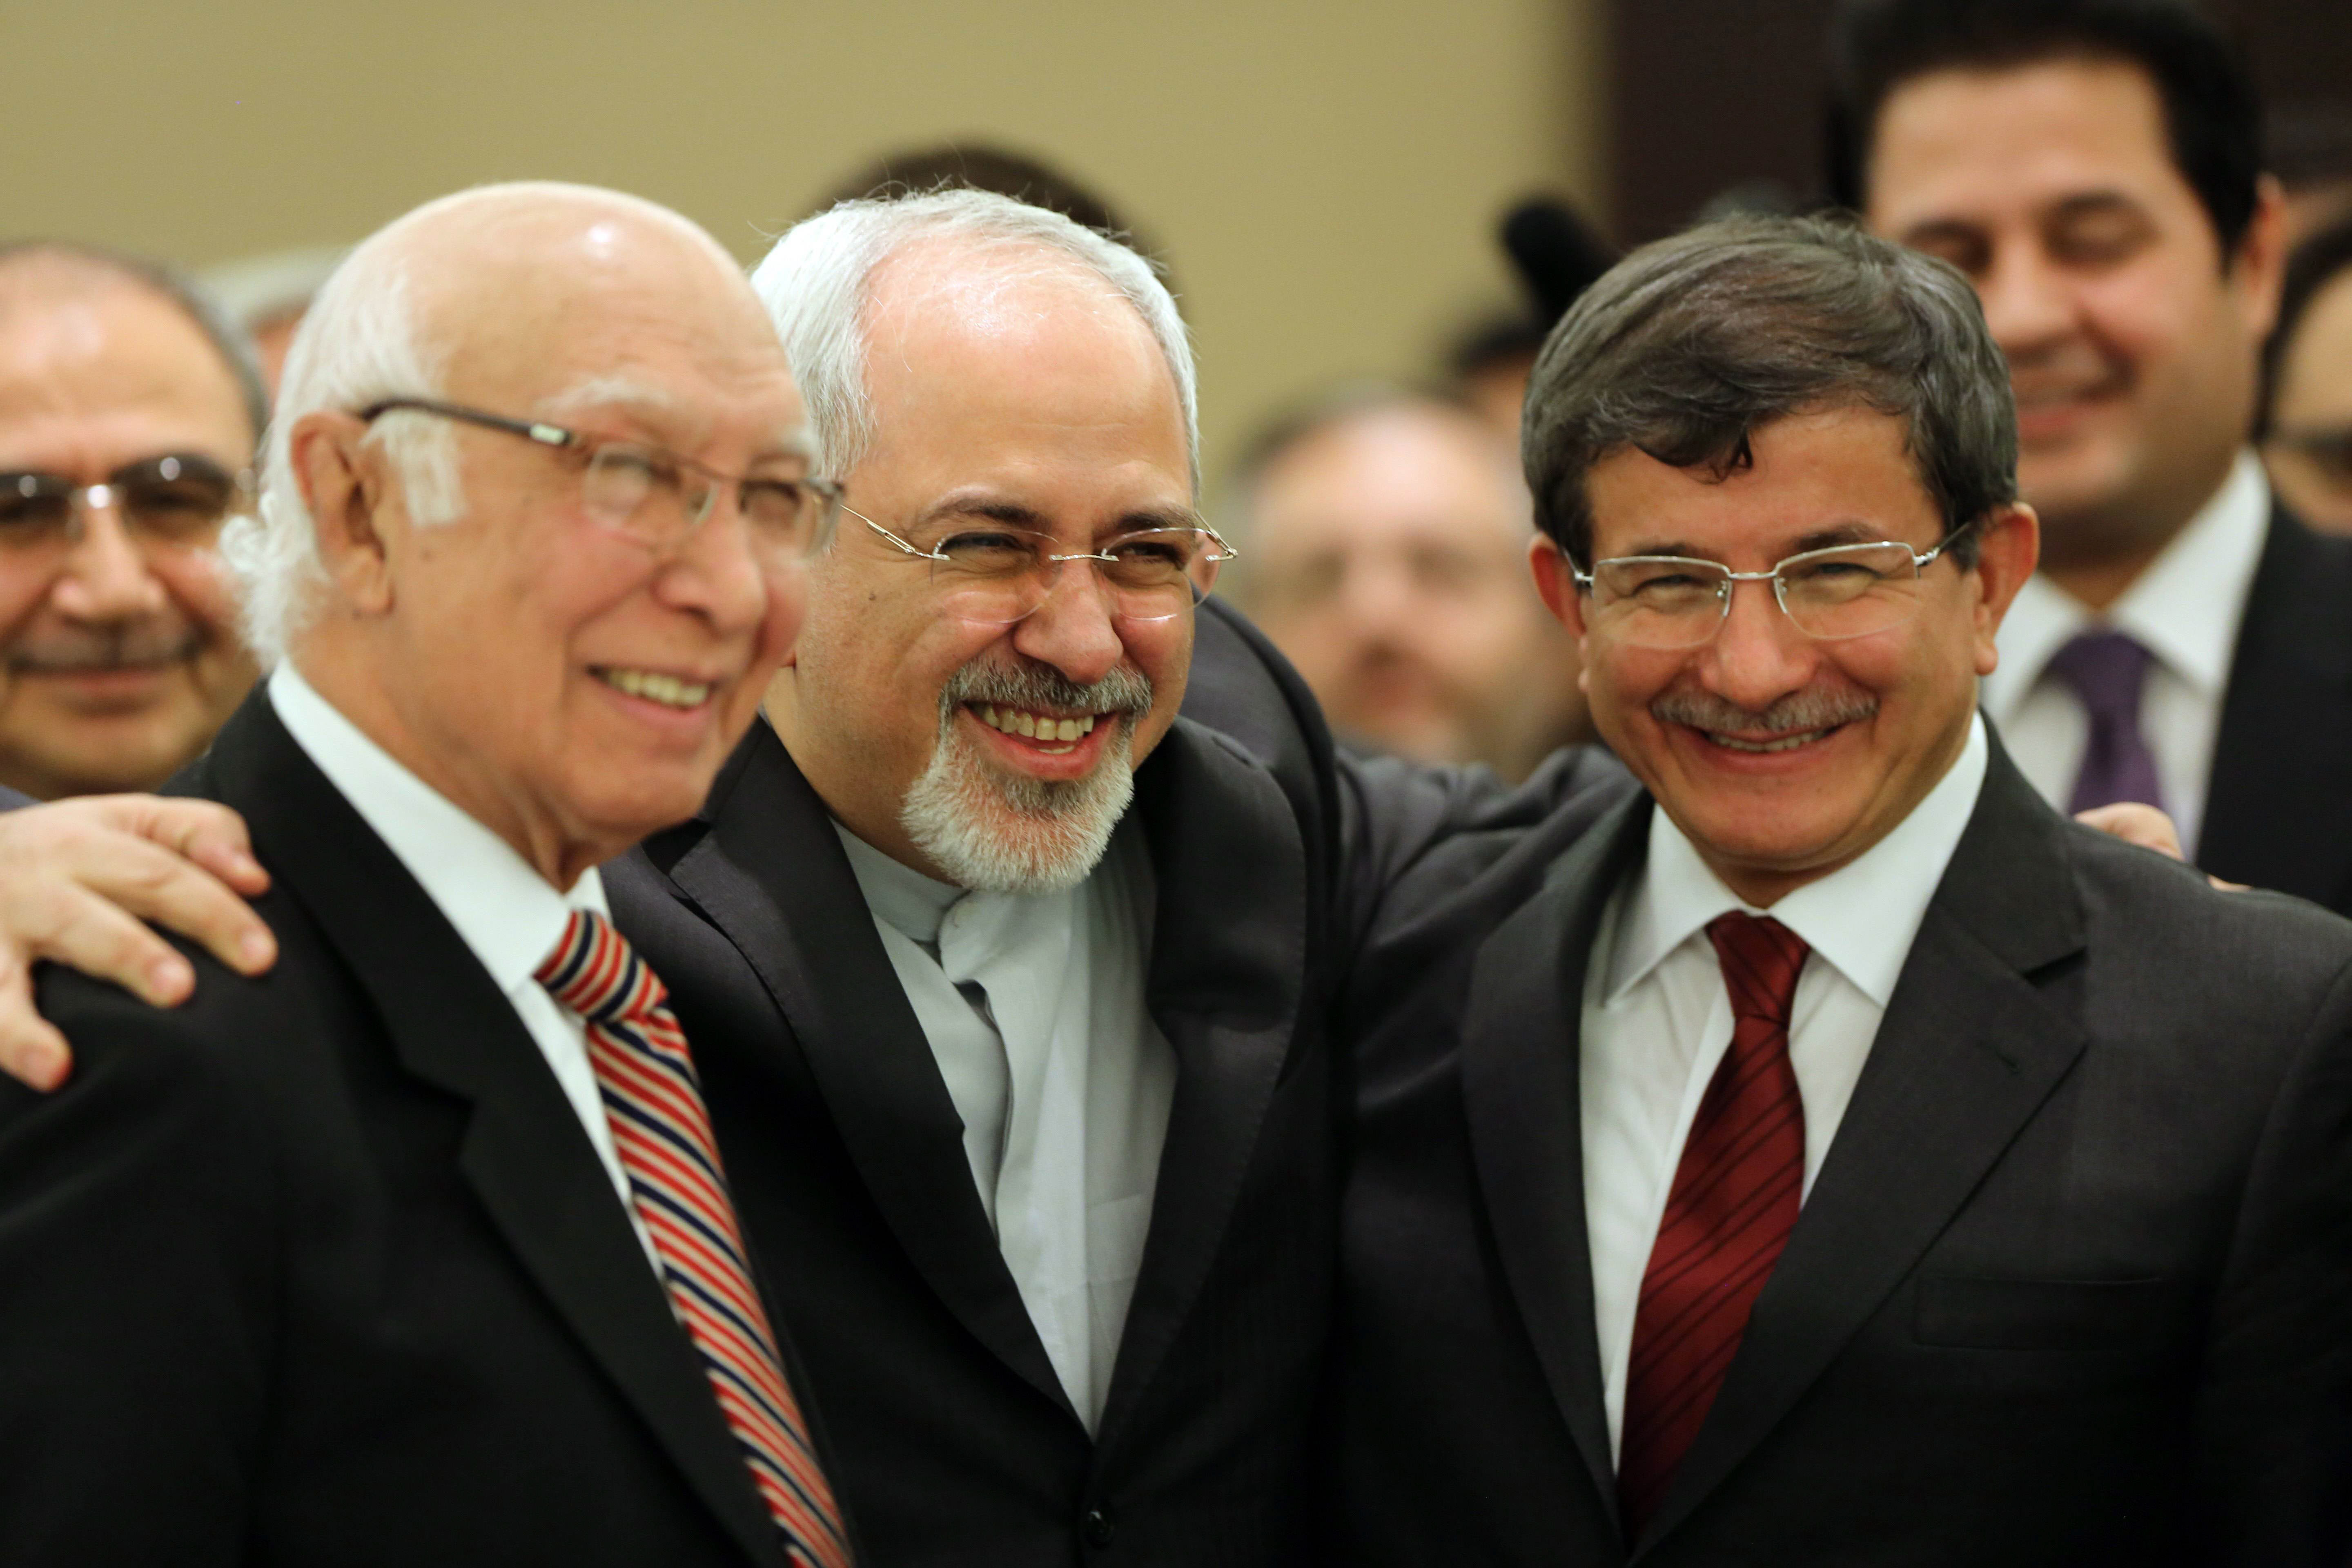 iranian foreign minister mohammad javad zarif c poses for a picture with his counterparts from pakistan sartaj aziz l and turkey ahmet davutoglu during the opening session of a two day ministerial conference of the economic cooperation organisation eco which groups 10 asian and eurasian countries in tehran on november 26 2013 photo afp